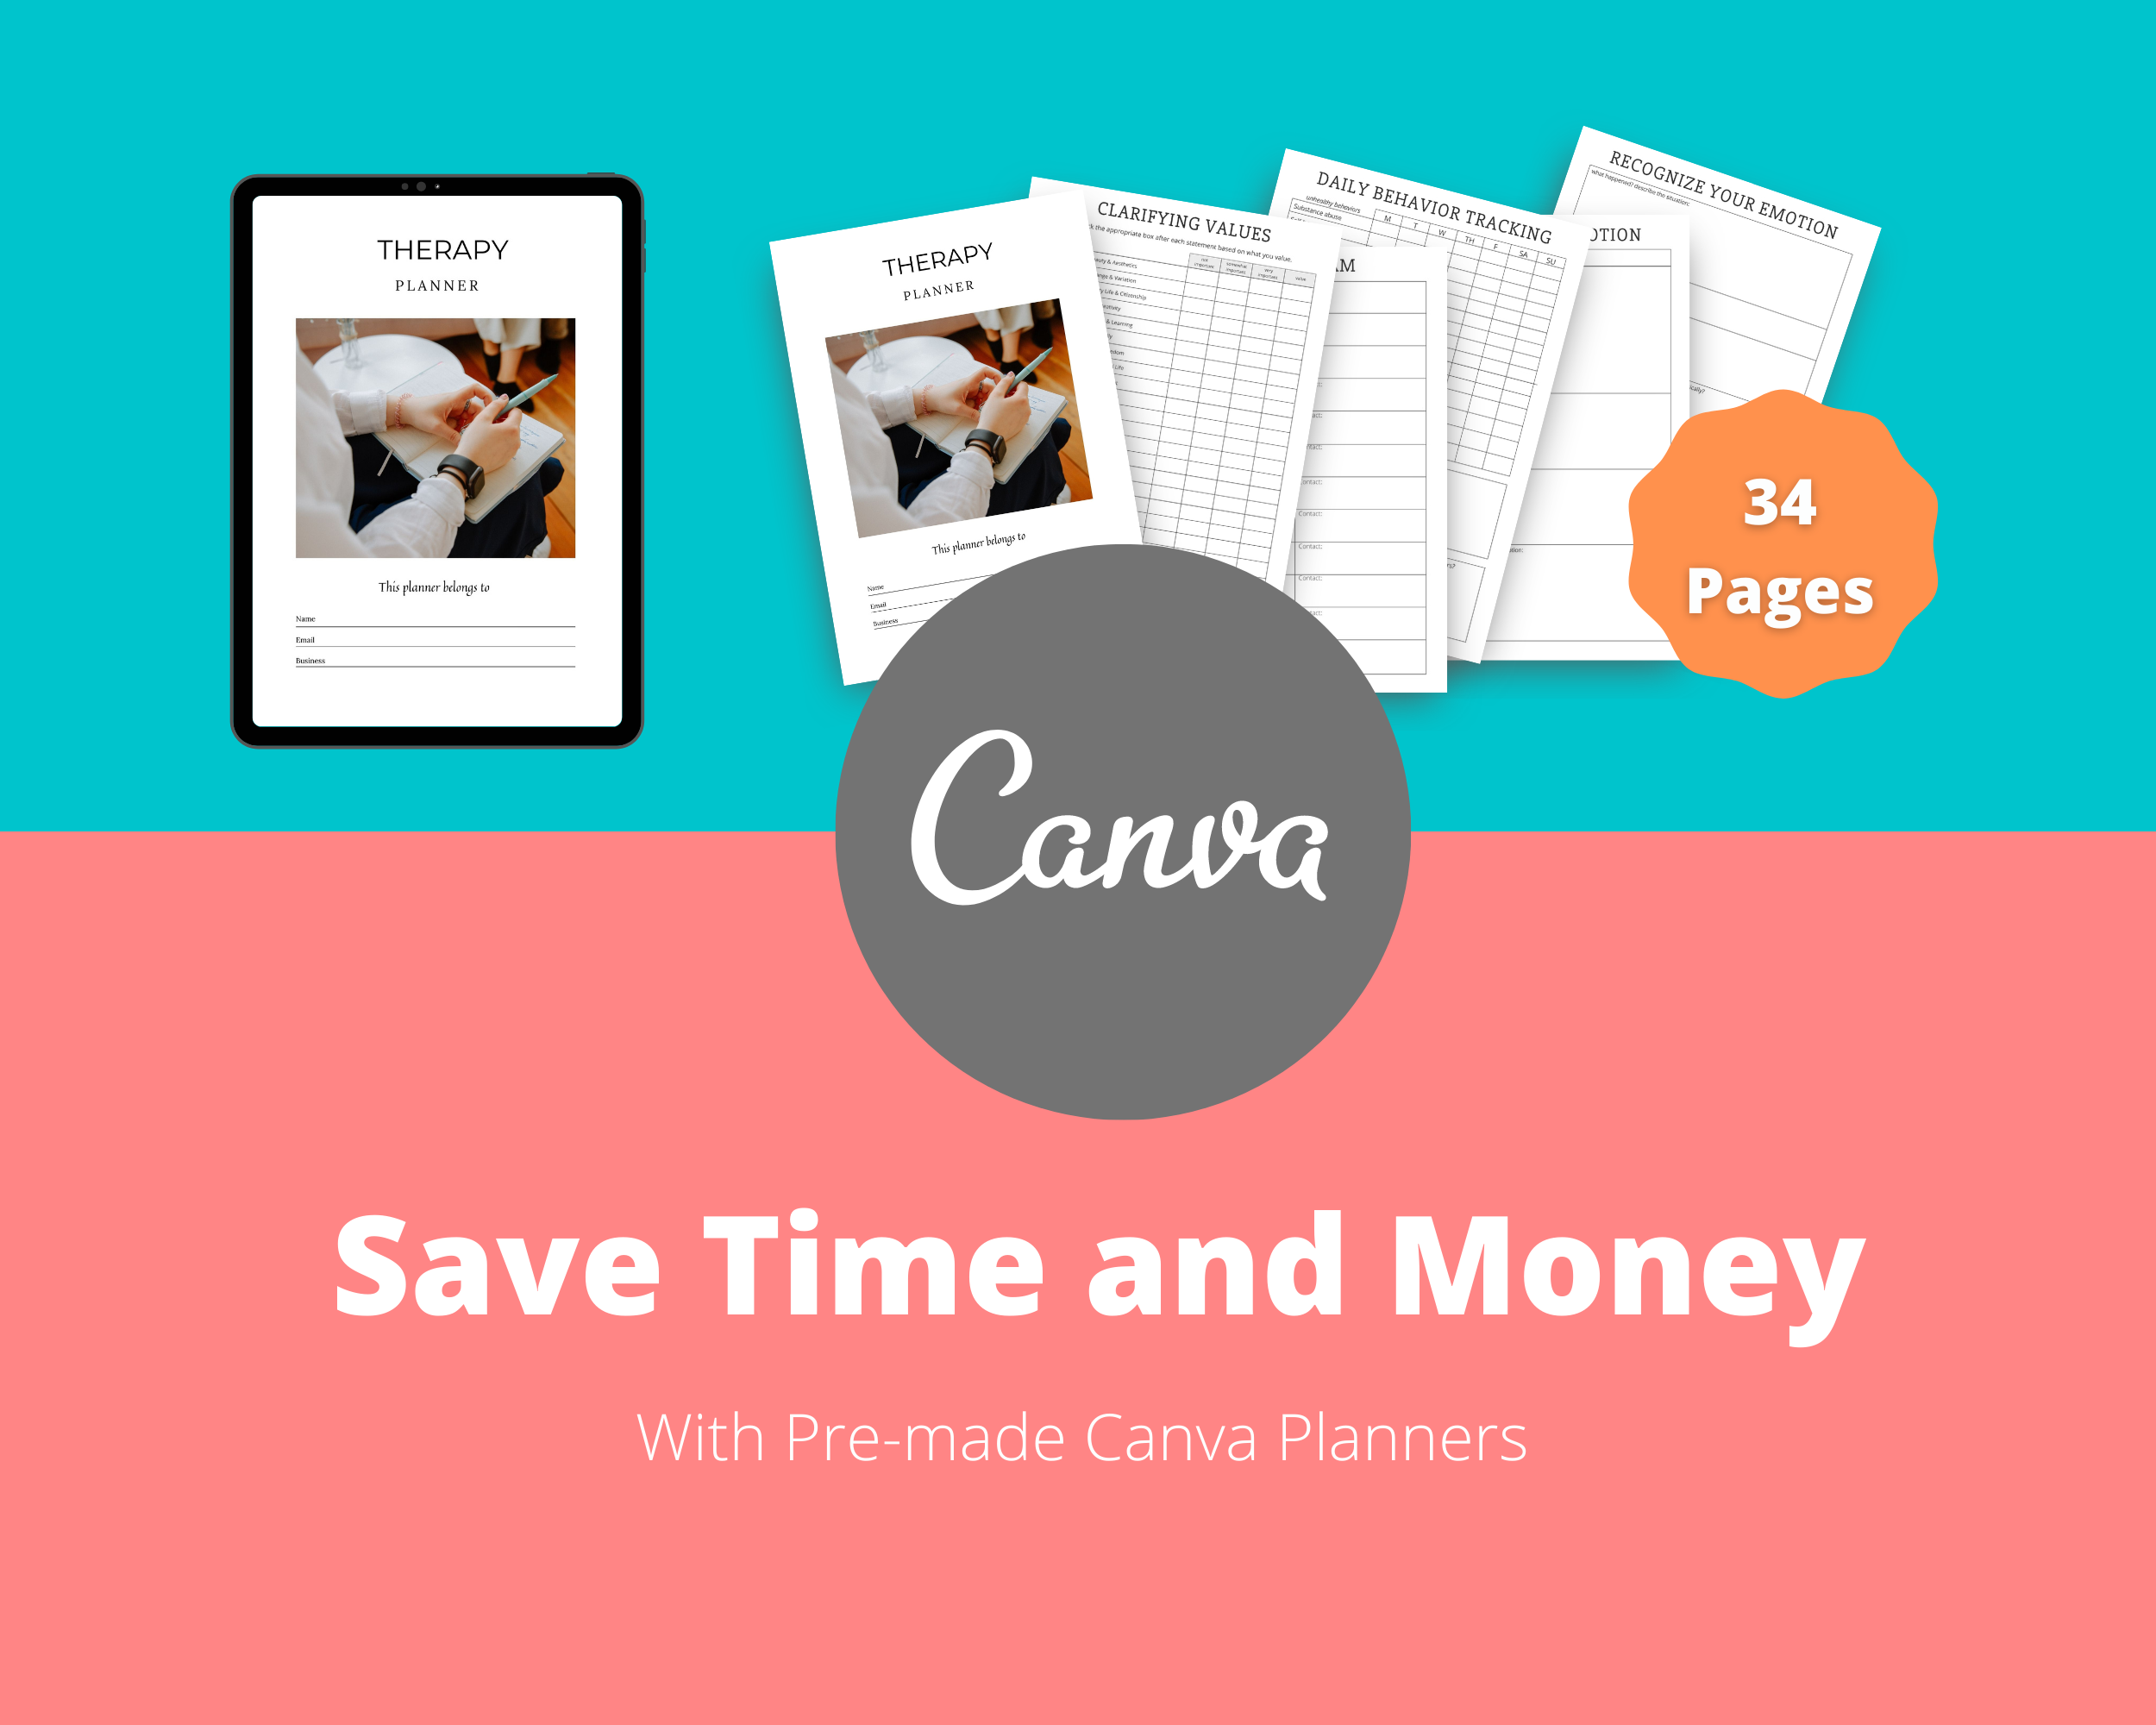 BUNDLE of 7 Therapy Planners in Canva | Customizable | Editable Canva Templates | Commercial Use | Therapy Planners